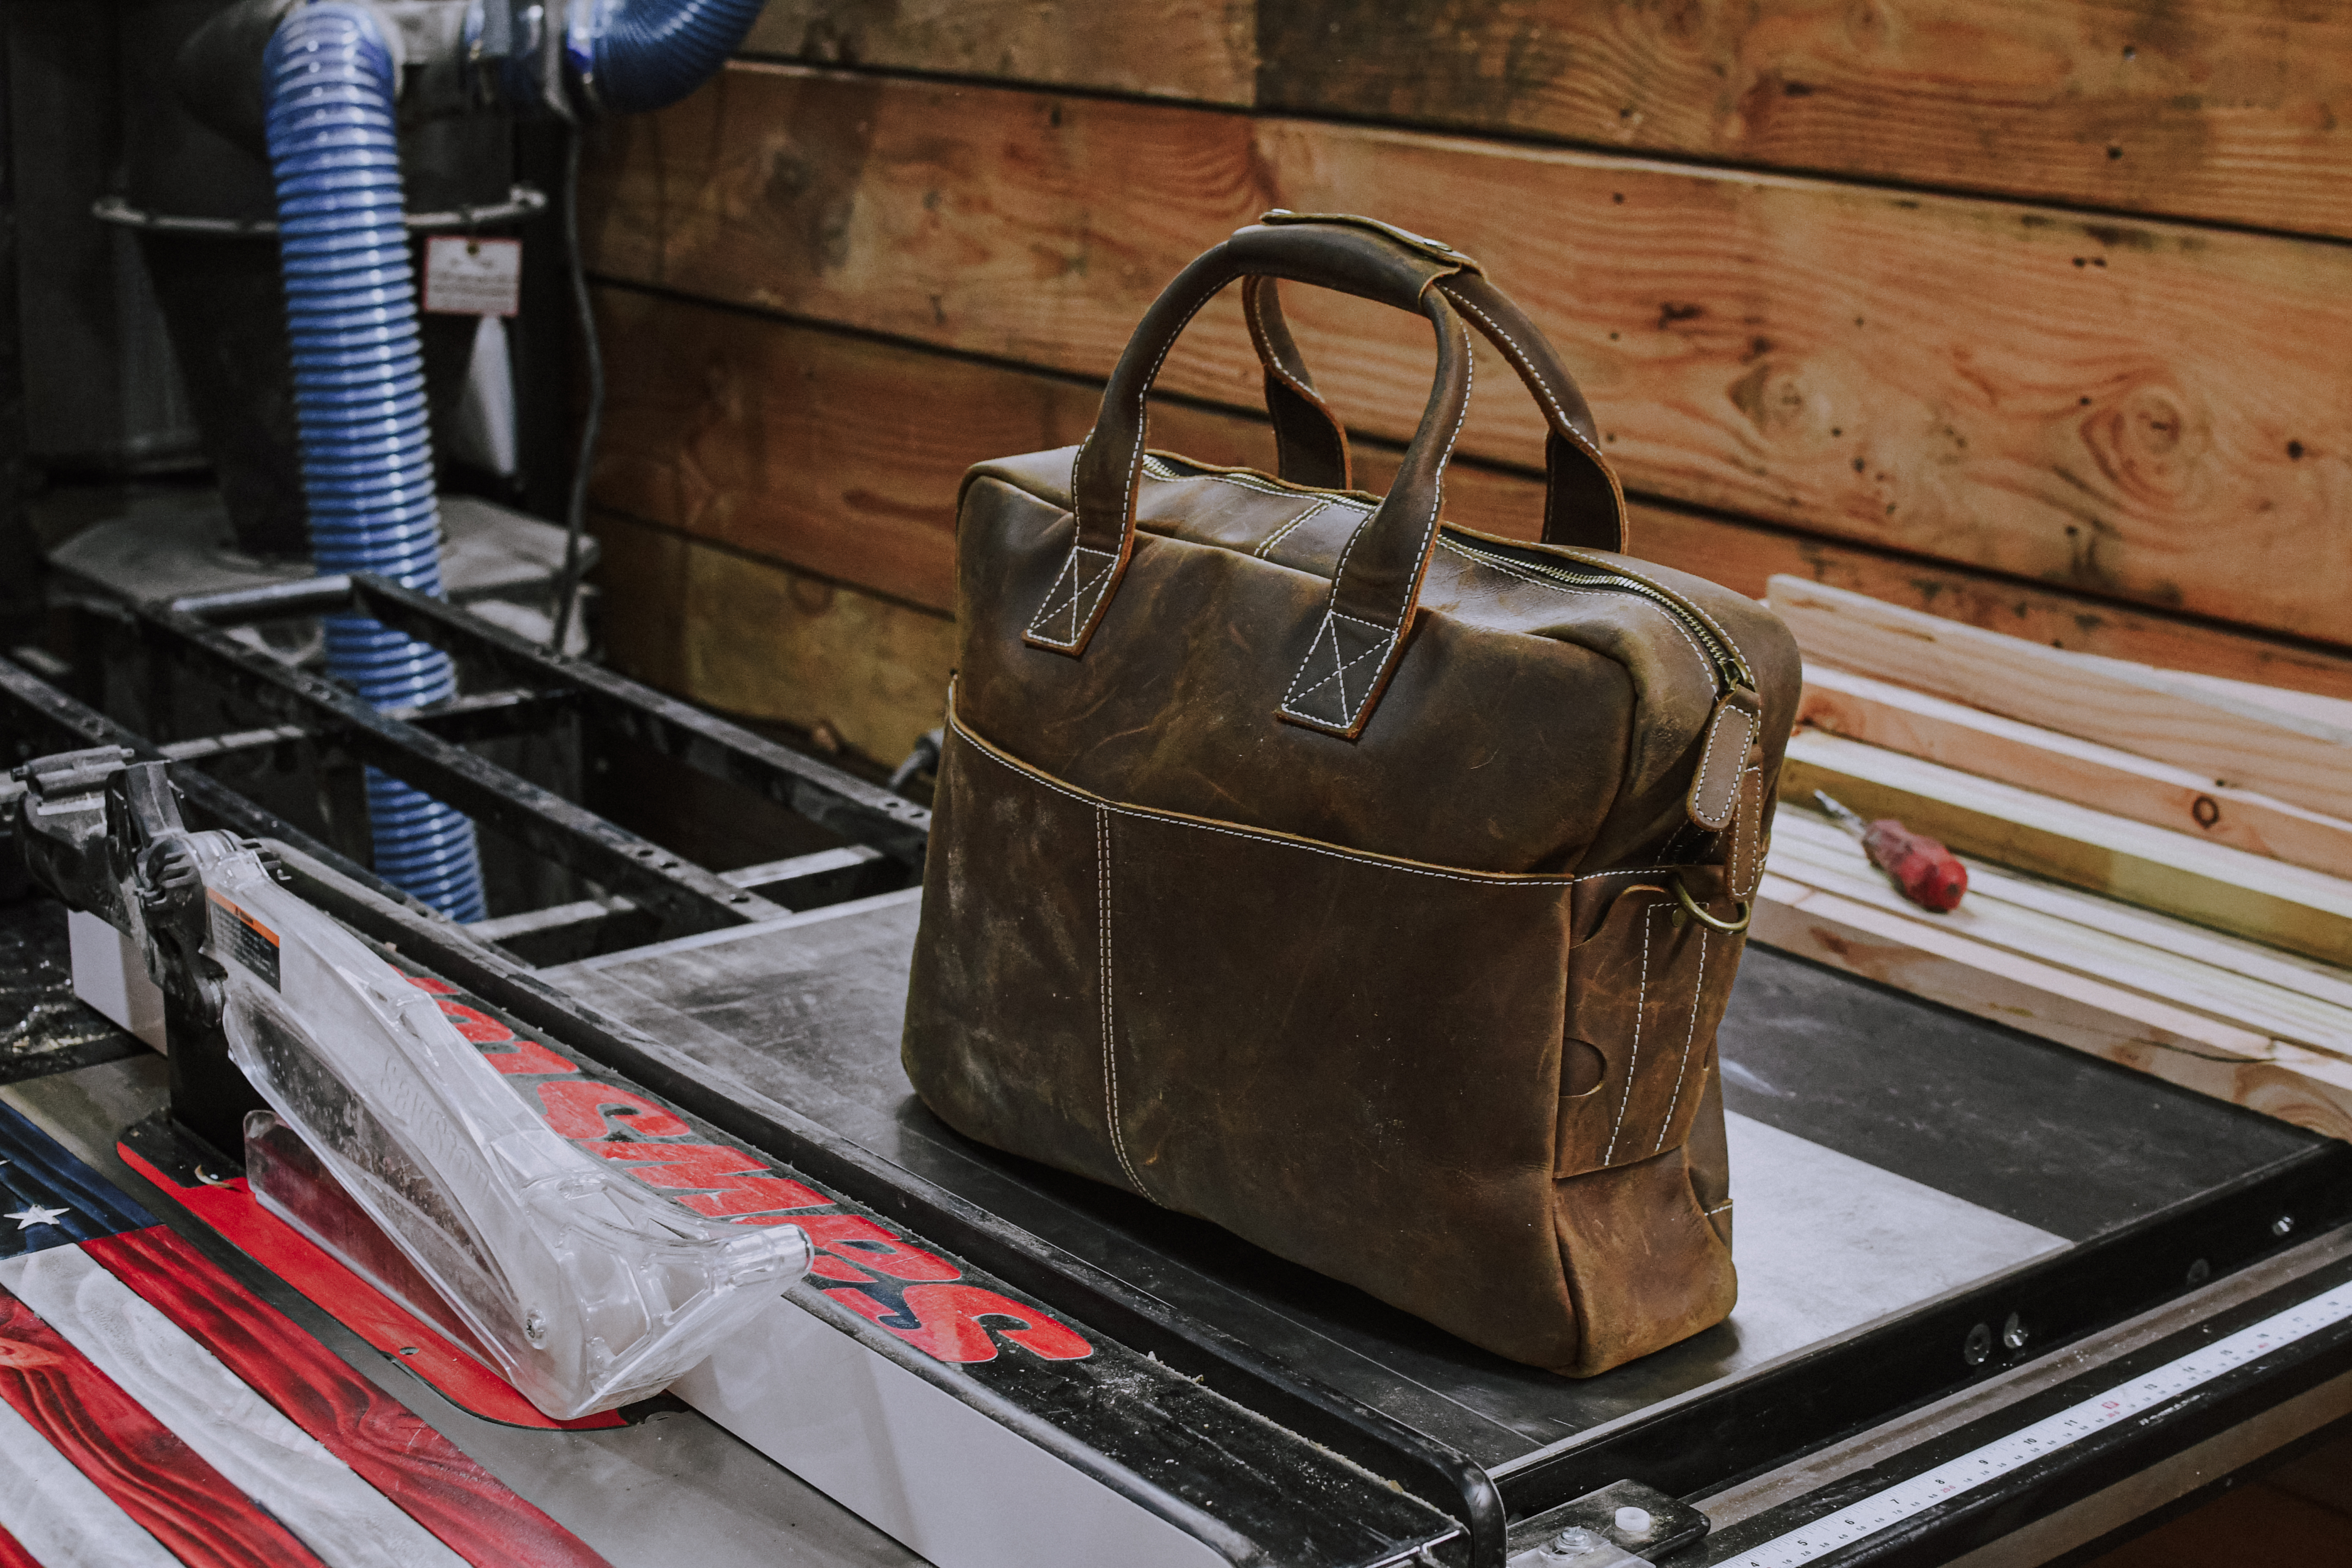 The Gentleman's Fashion Guide to Leather Bags